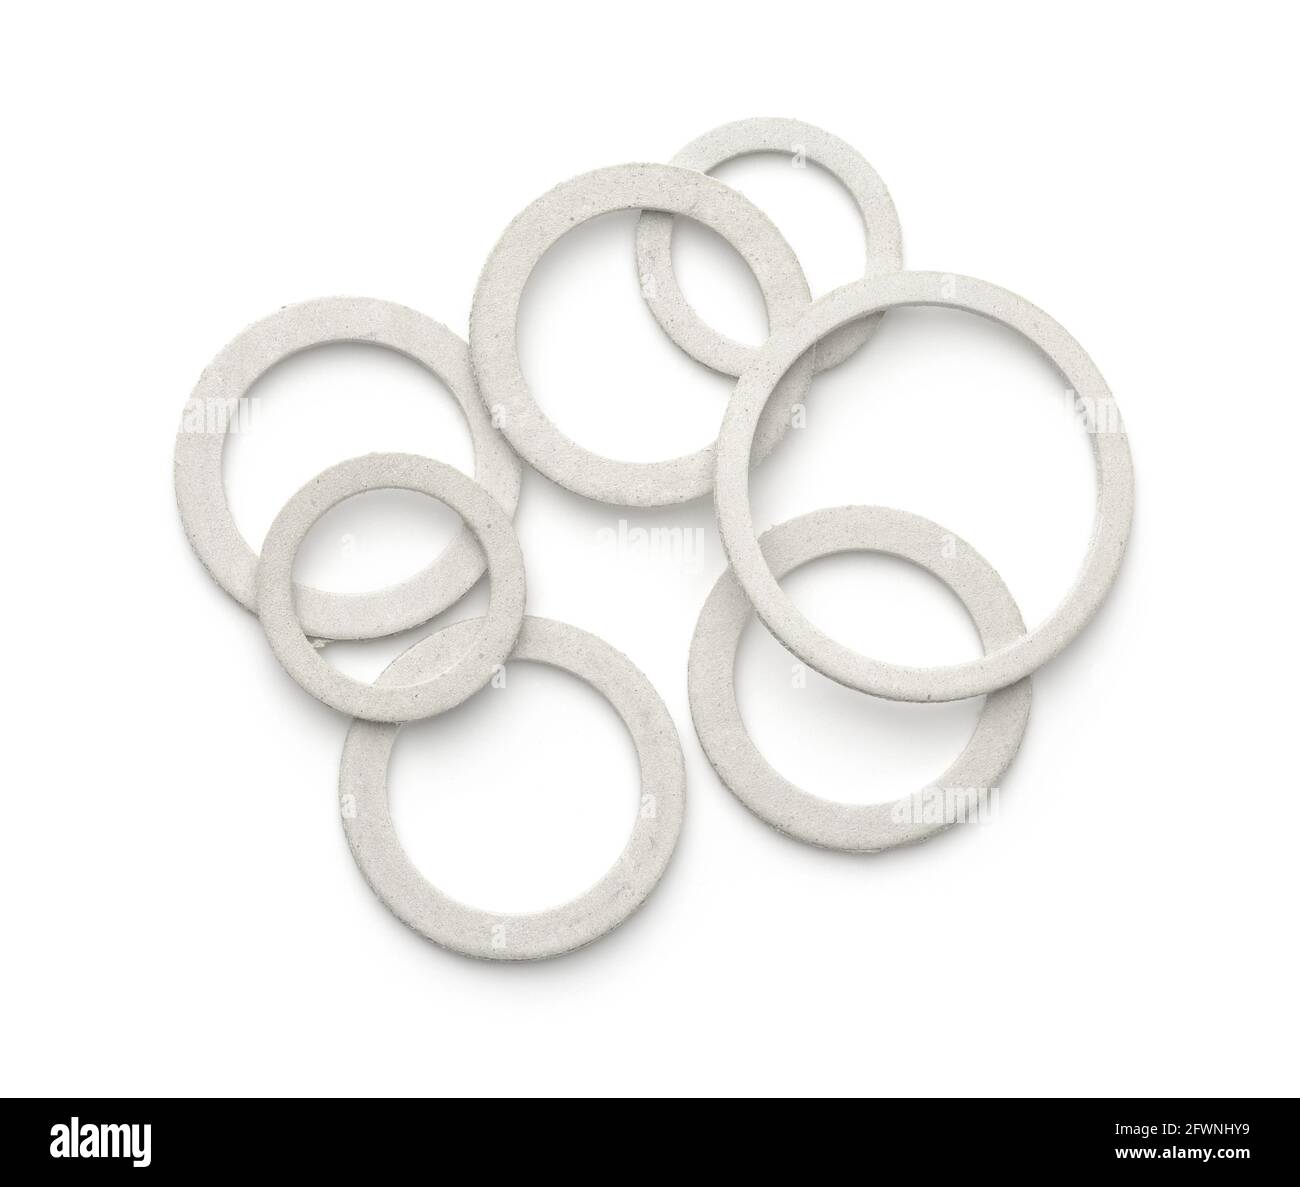 Top view of various paronite gaskets isolated on white Stock Photo